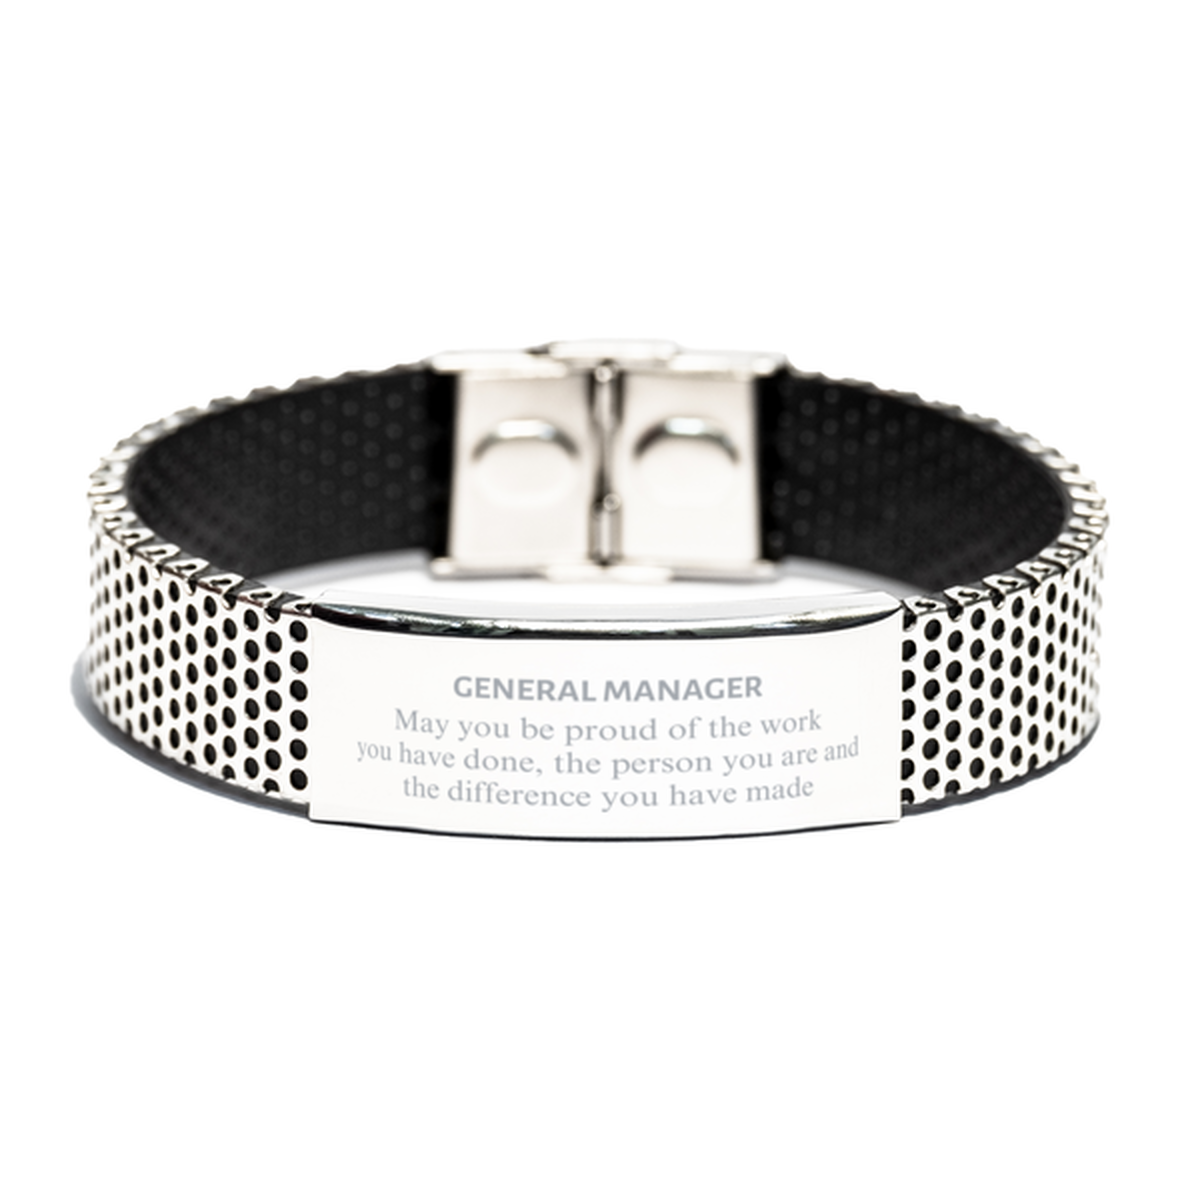 General Manager May you be proud of the work you have done, Retirement General Manager Stainless Steel Bracelet for Colleague Appreciation Gifts Amazing for General Manager